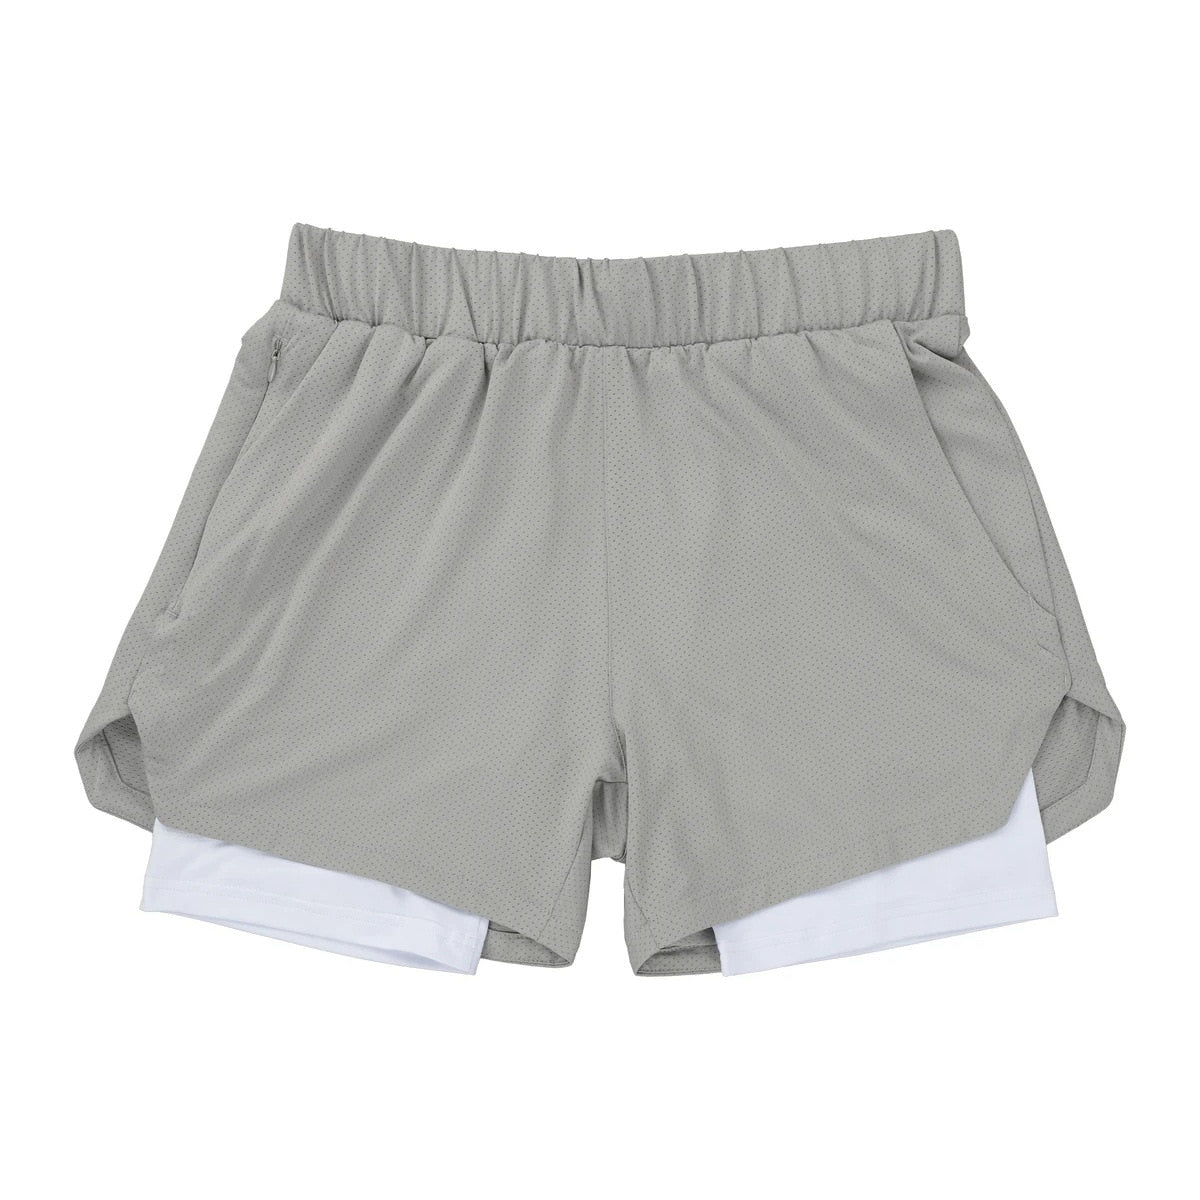 Running Shorts & Fitness Double-deck Shorts For MenRunning Shorts & Fitness Double-deck Shorts For Men